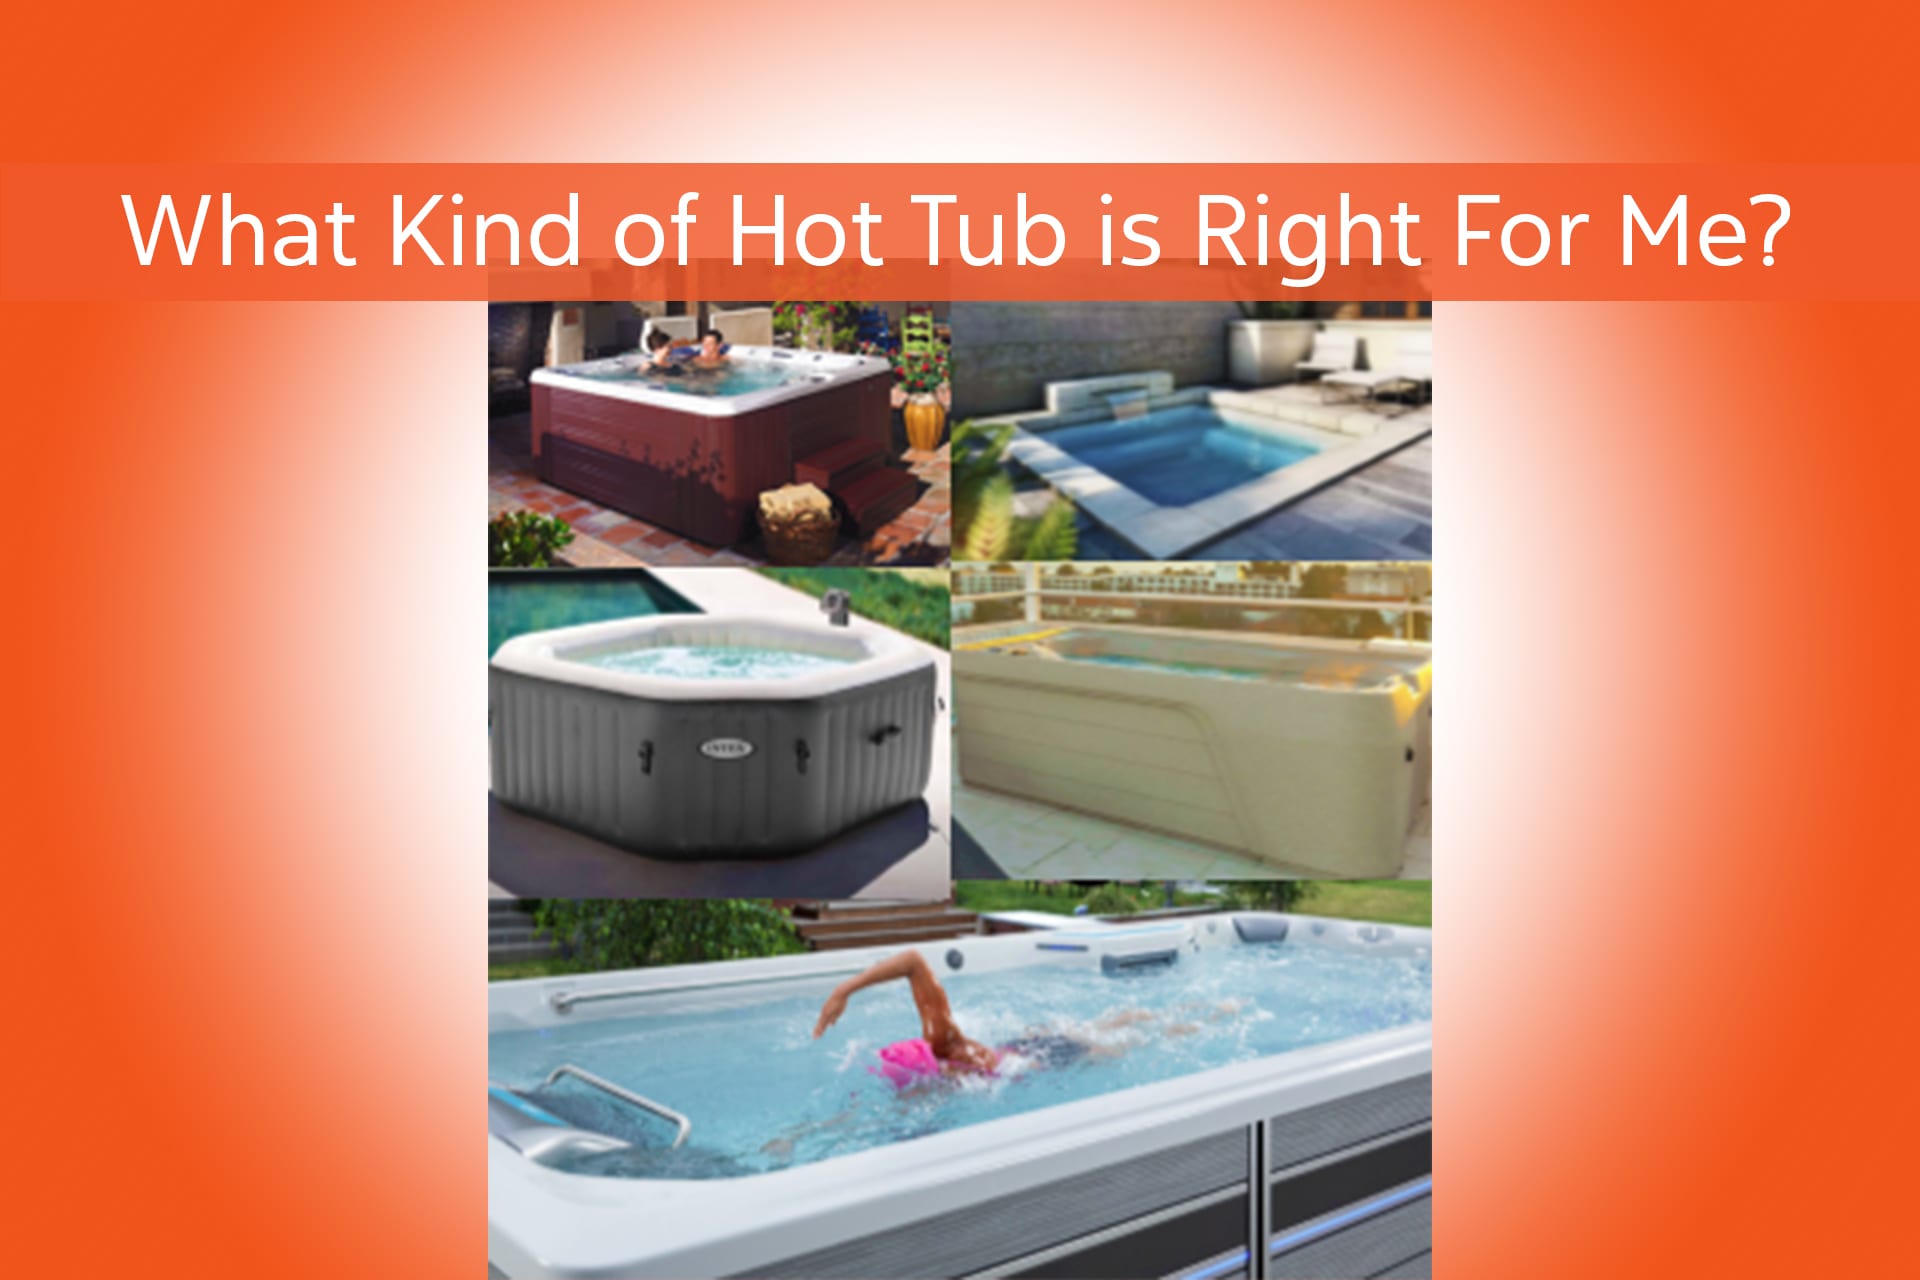 What Kind of Hot Tub is Right For Me